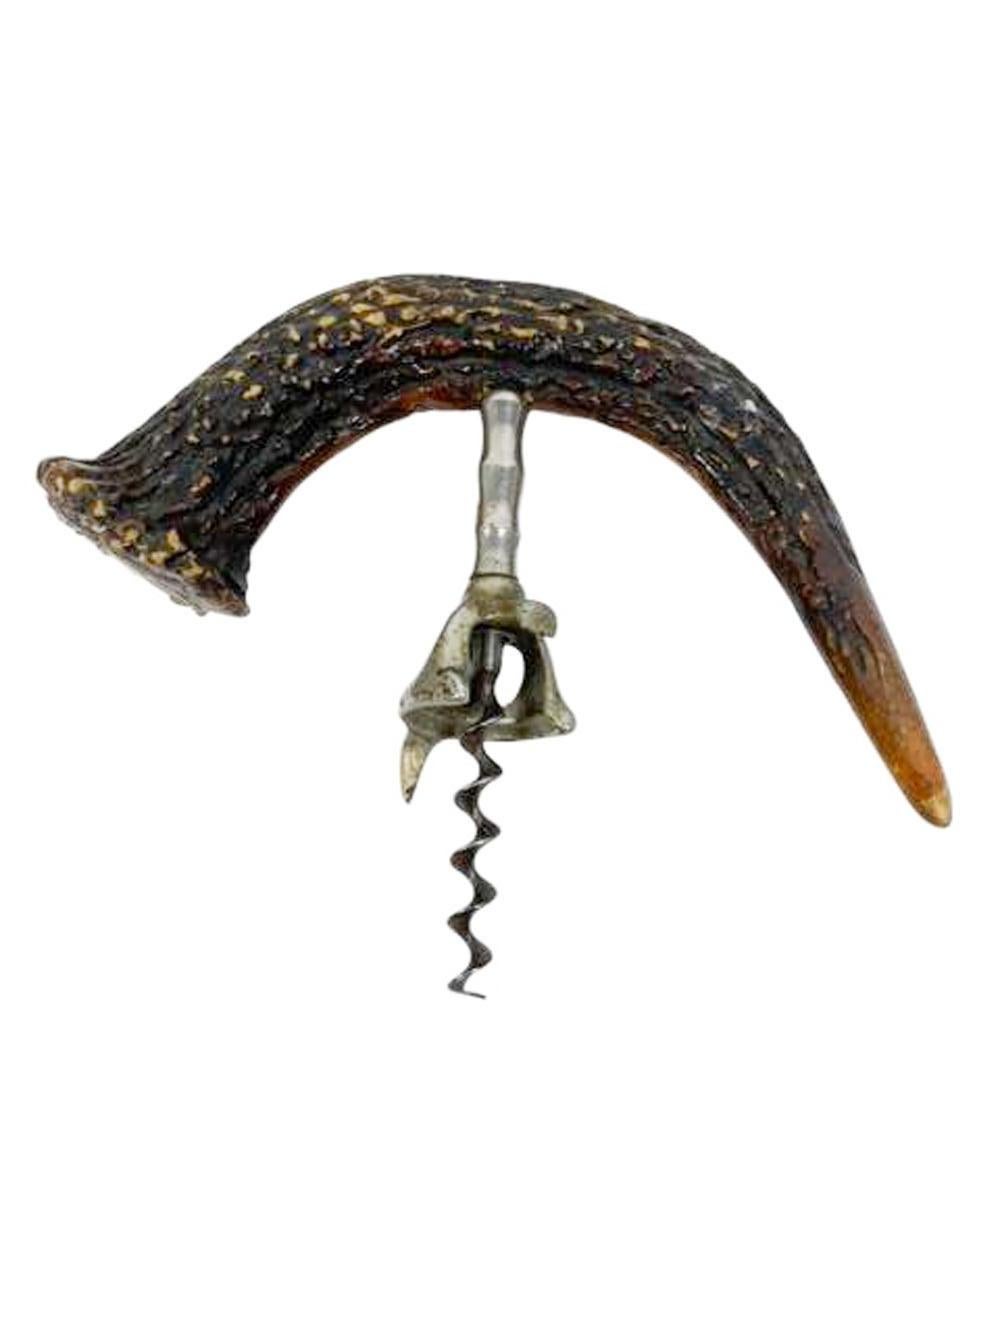 Seven inch wide stag horn handled corkscrew with curved handle having a silver cartouche applied to the butt end (no monogram).